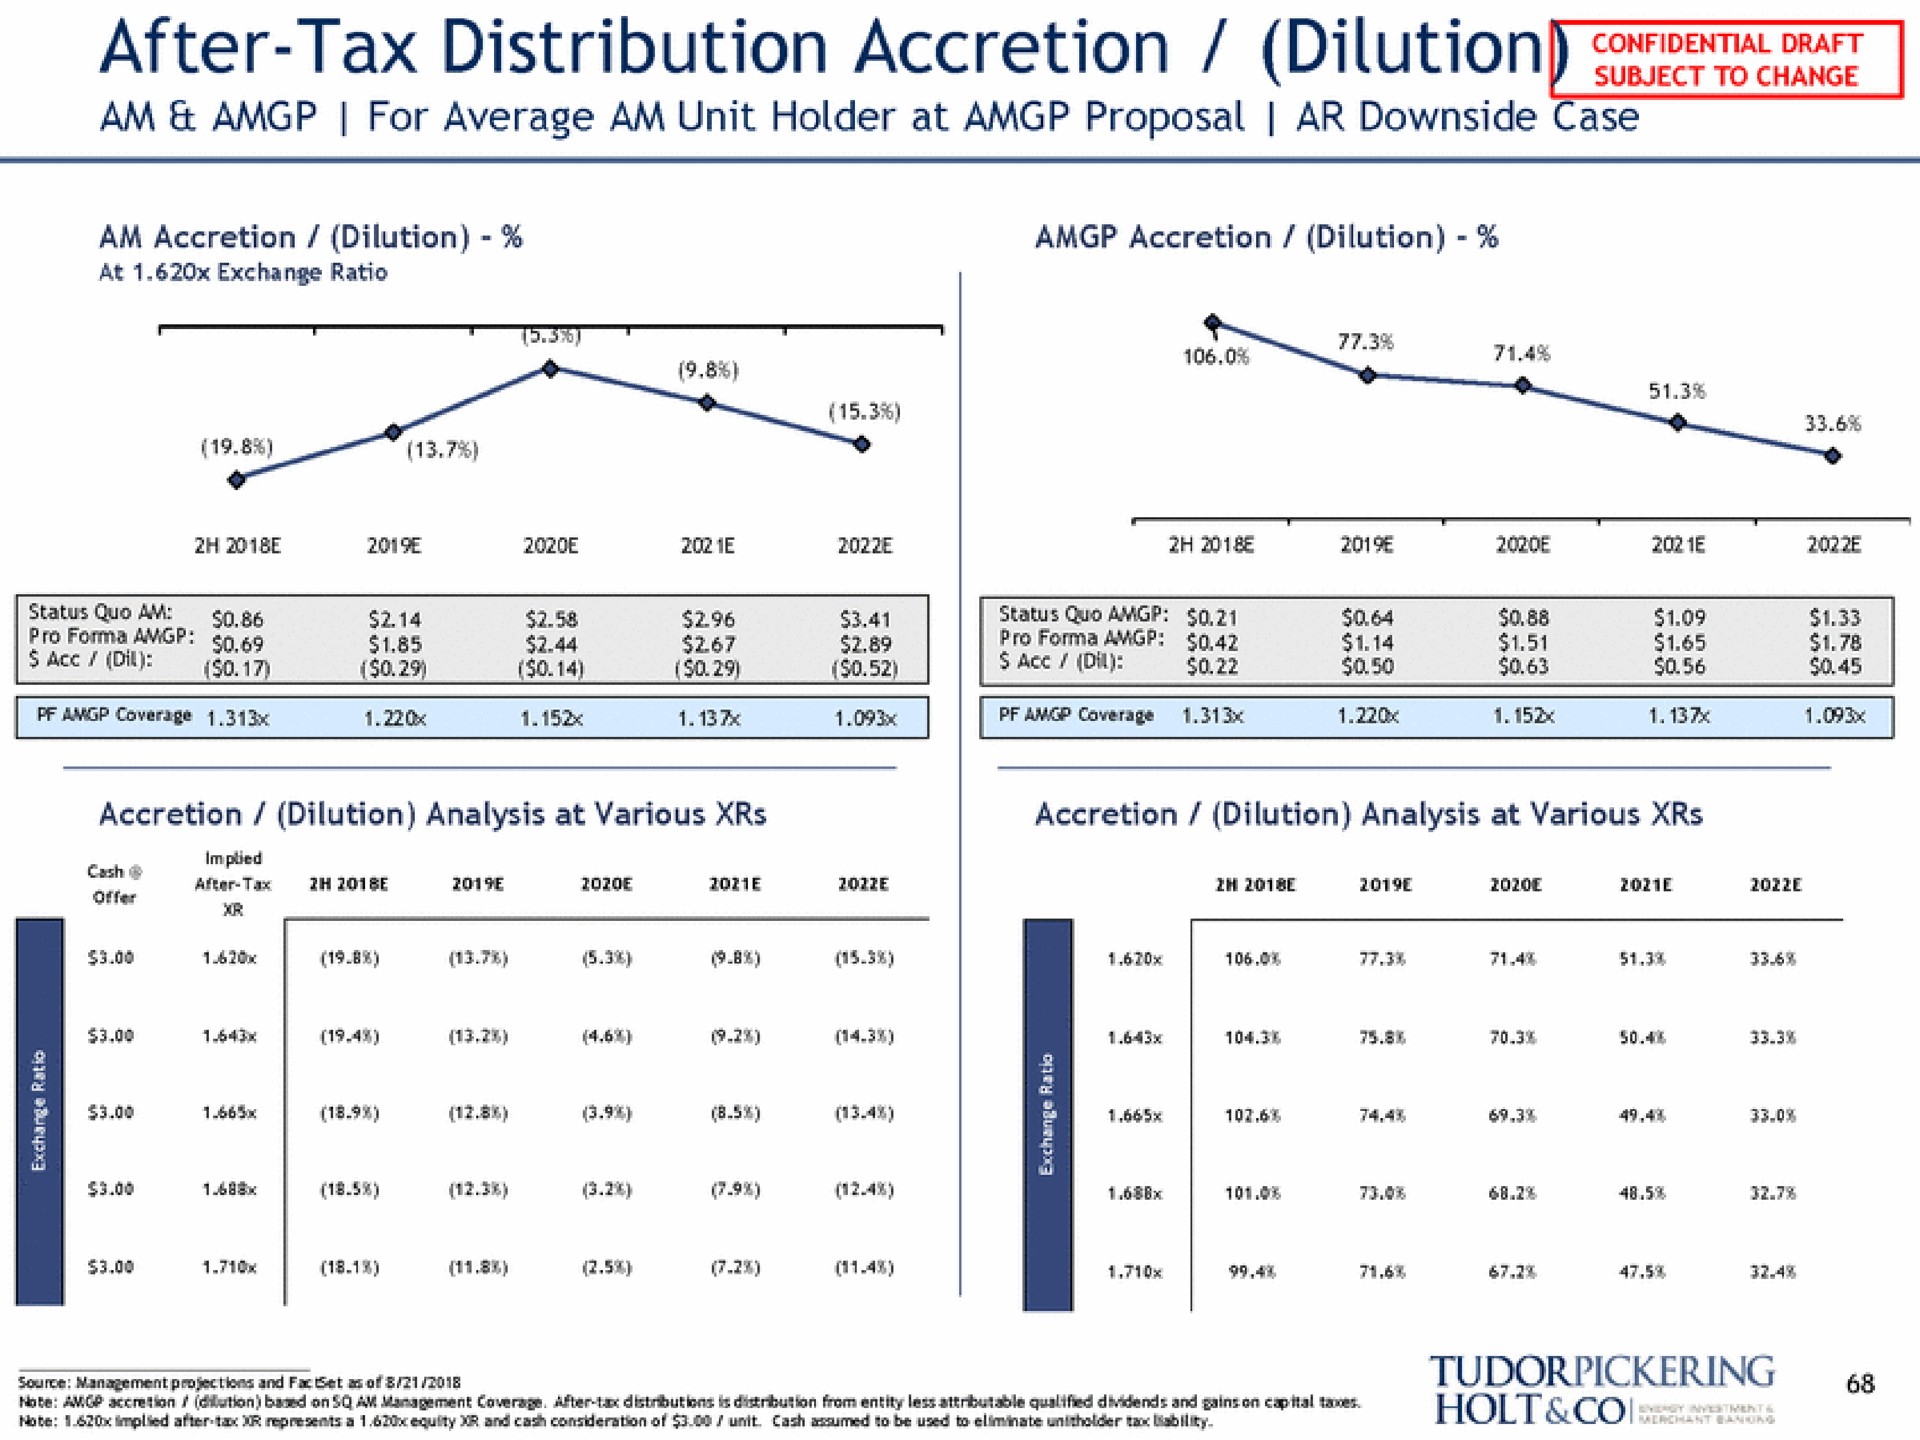 after tax distribution accretion dilution subject to change am for average am unit holder at proposal downside case source management projections and a of ring | Tudor, Pickering, Holt & Co